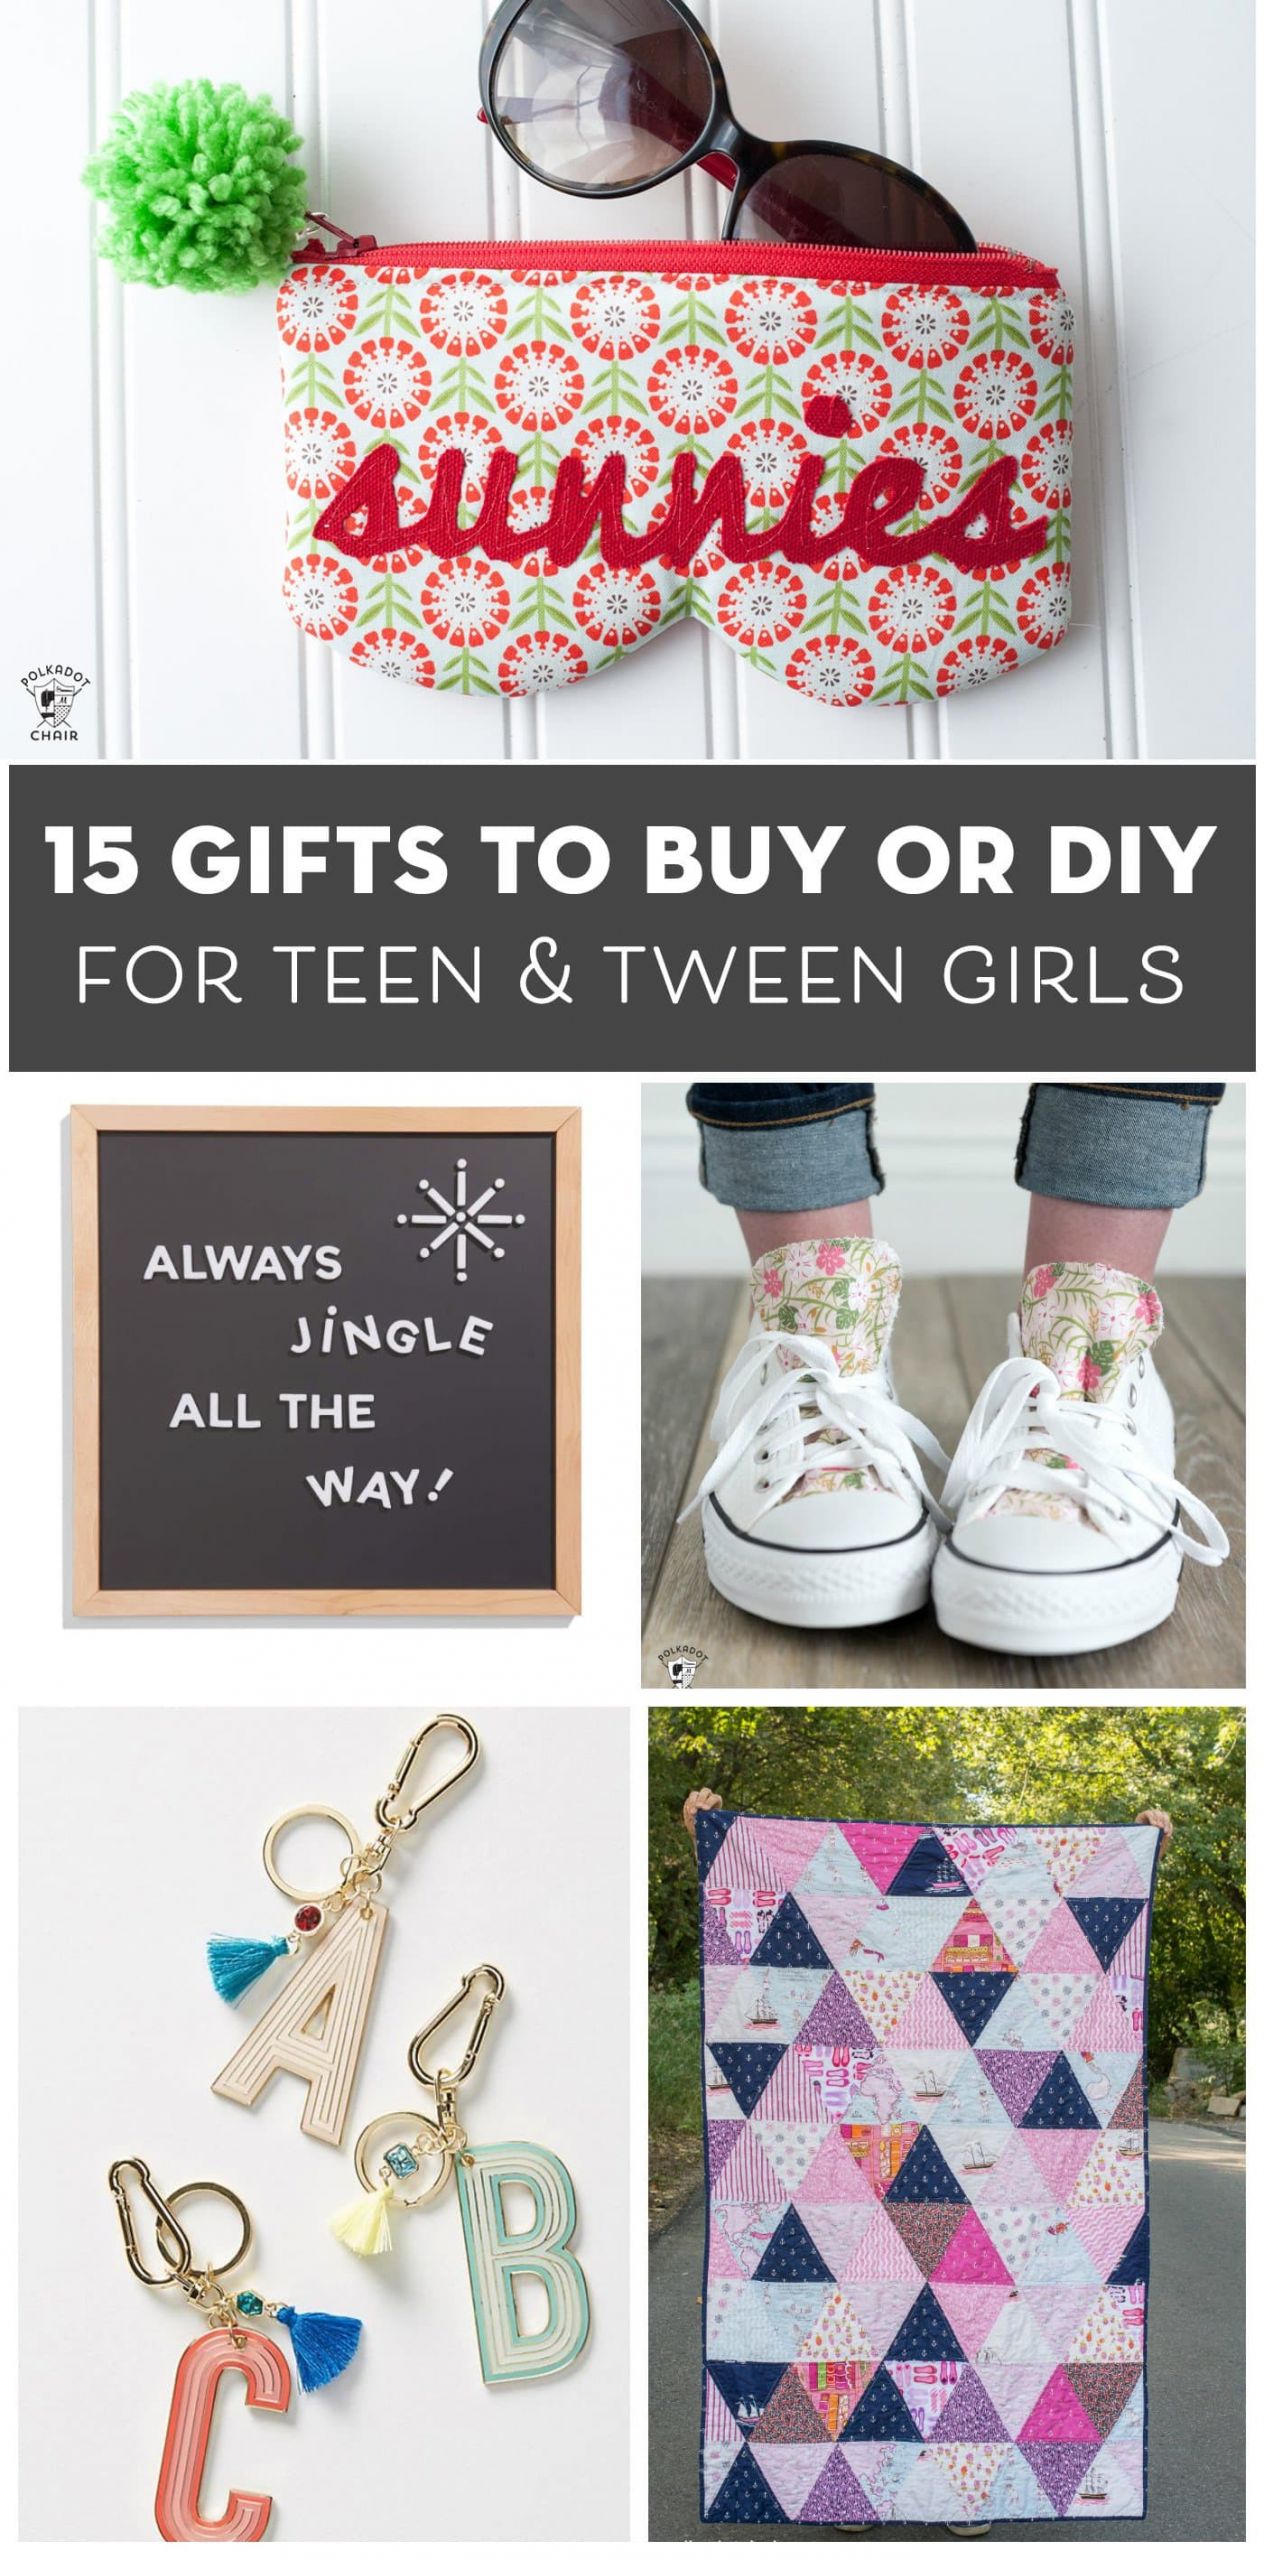 Diy Gift Ideas For Girls
 15 Gift Ideas for Teenage Girls That You Can DIY or Buy